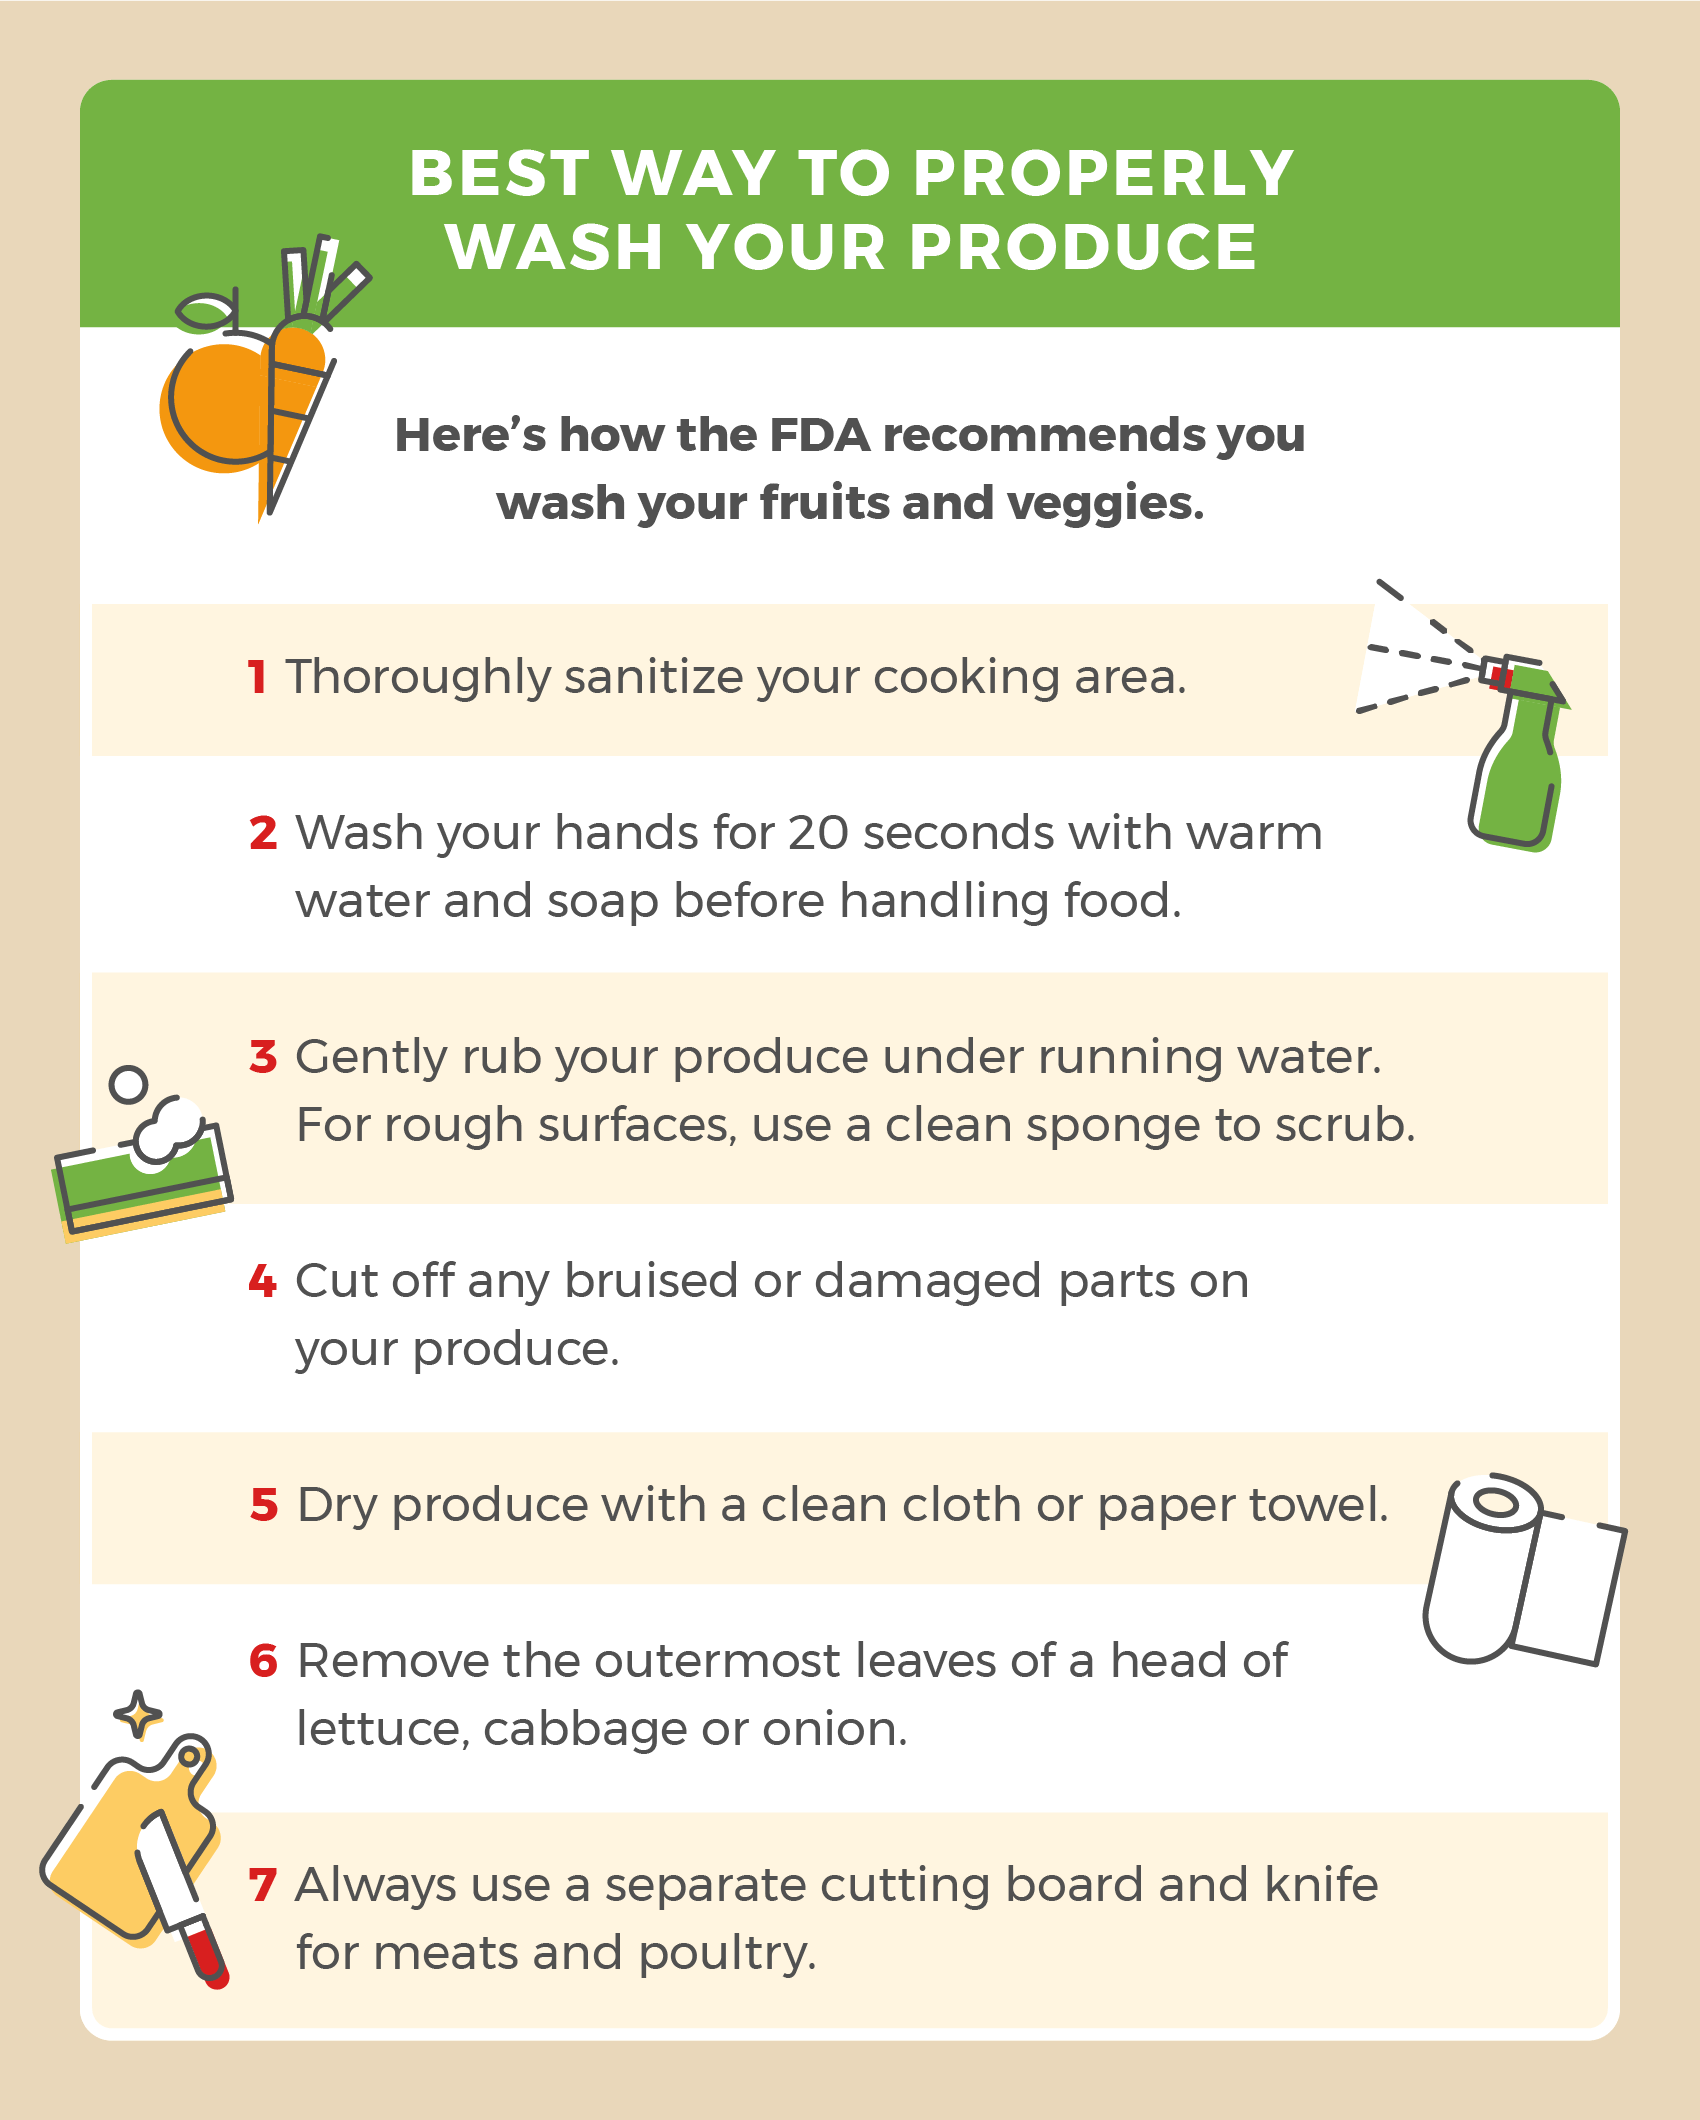 Wash your hands before handling food, rinse produce under cold water, dry produce thoroughly, and always use a separate cutting board for meats and poultry. 